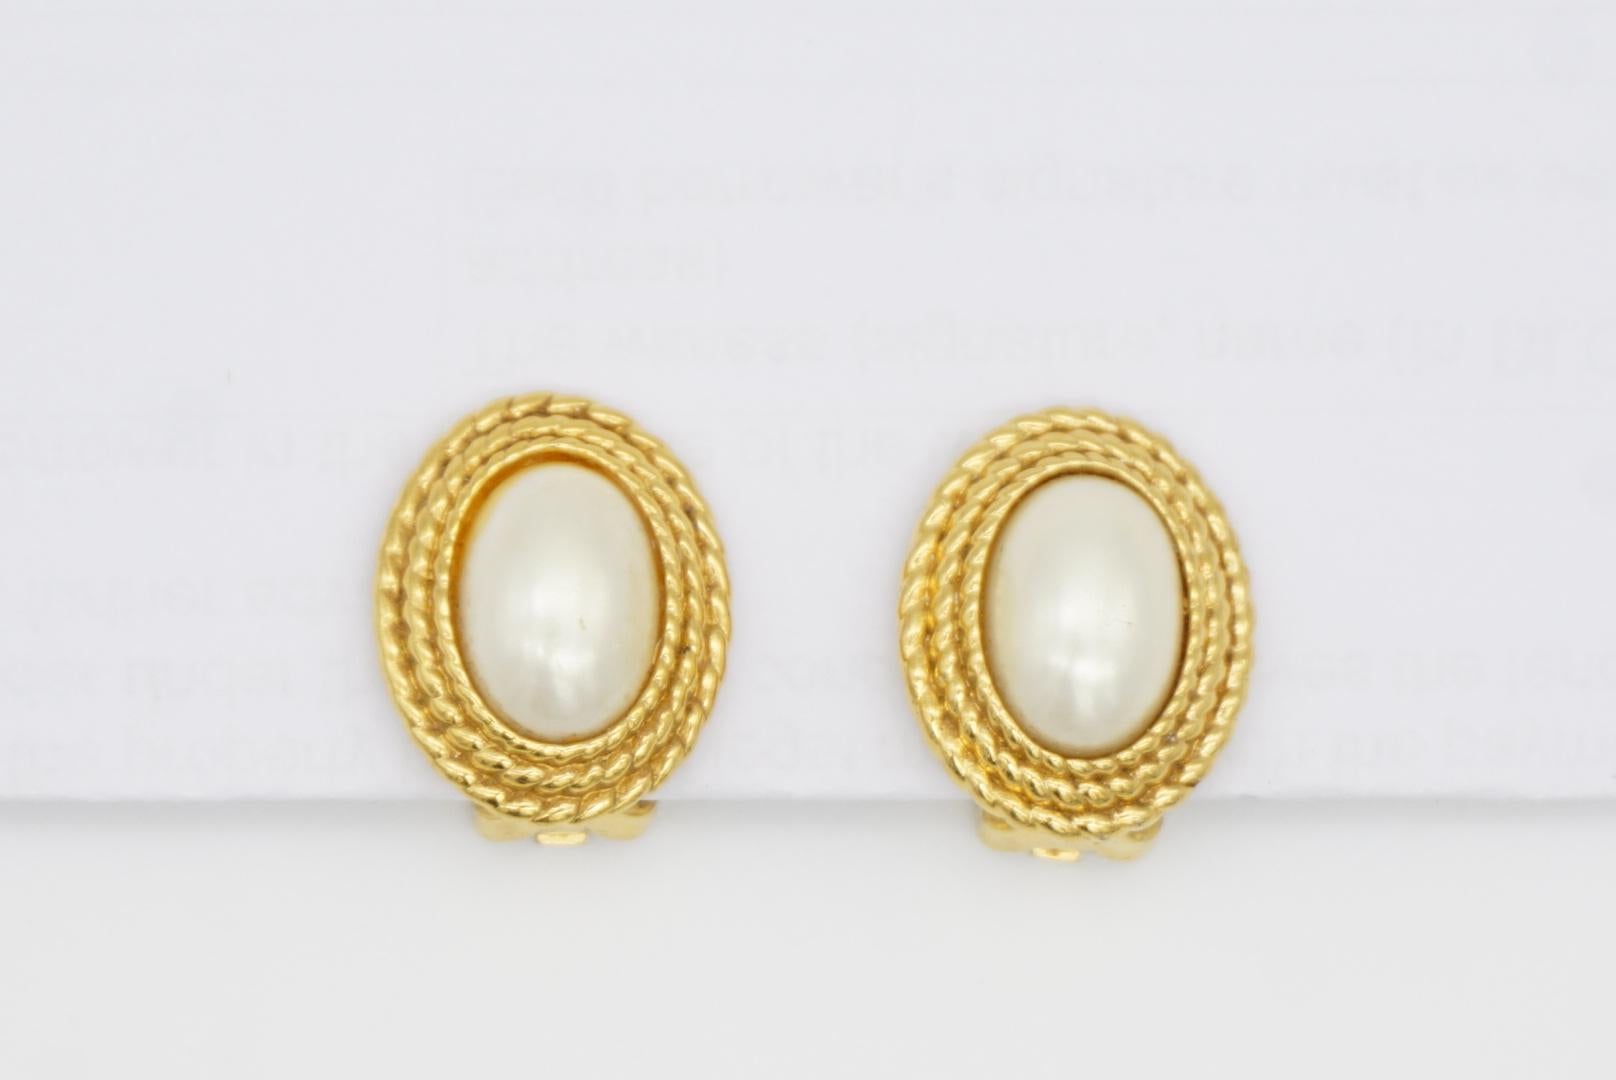 Christian Dior Vintage 1980s White Oval Pearl Triple Layer Swirl Braid Earrings For Sale 4